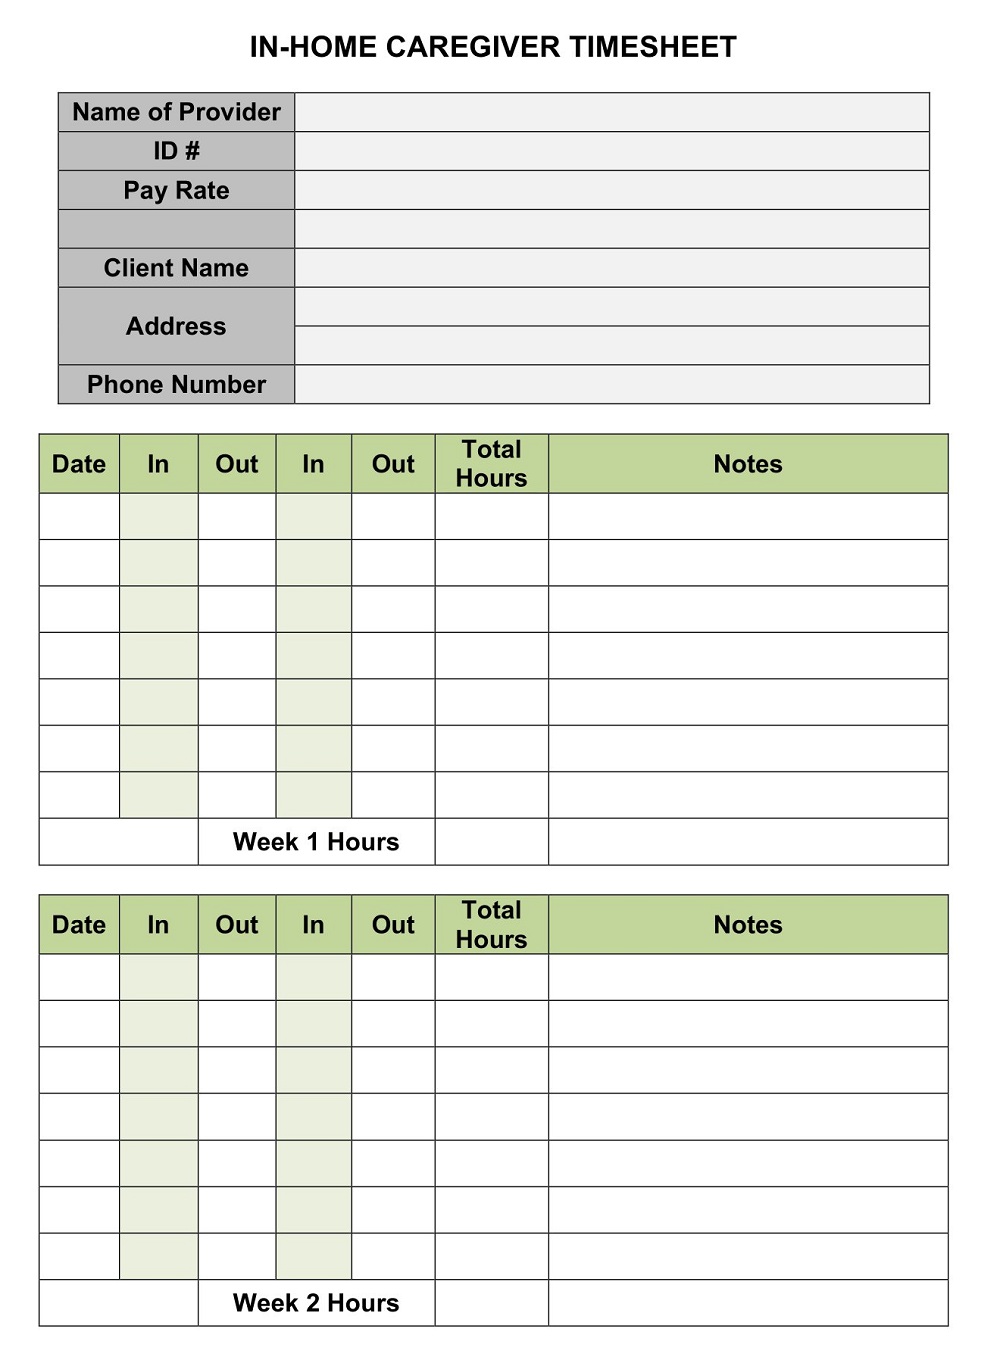 Blank In-home Caregiver Timesheet